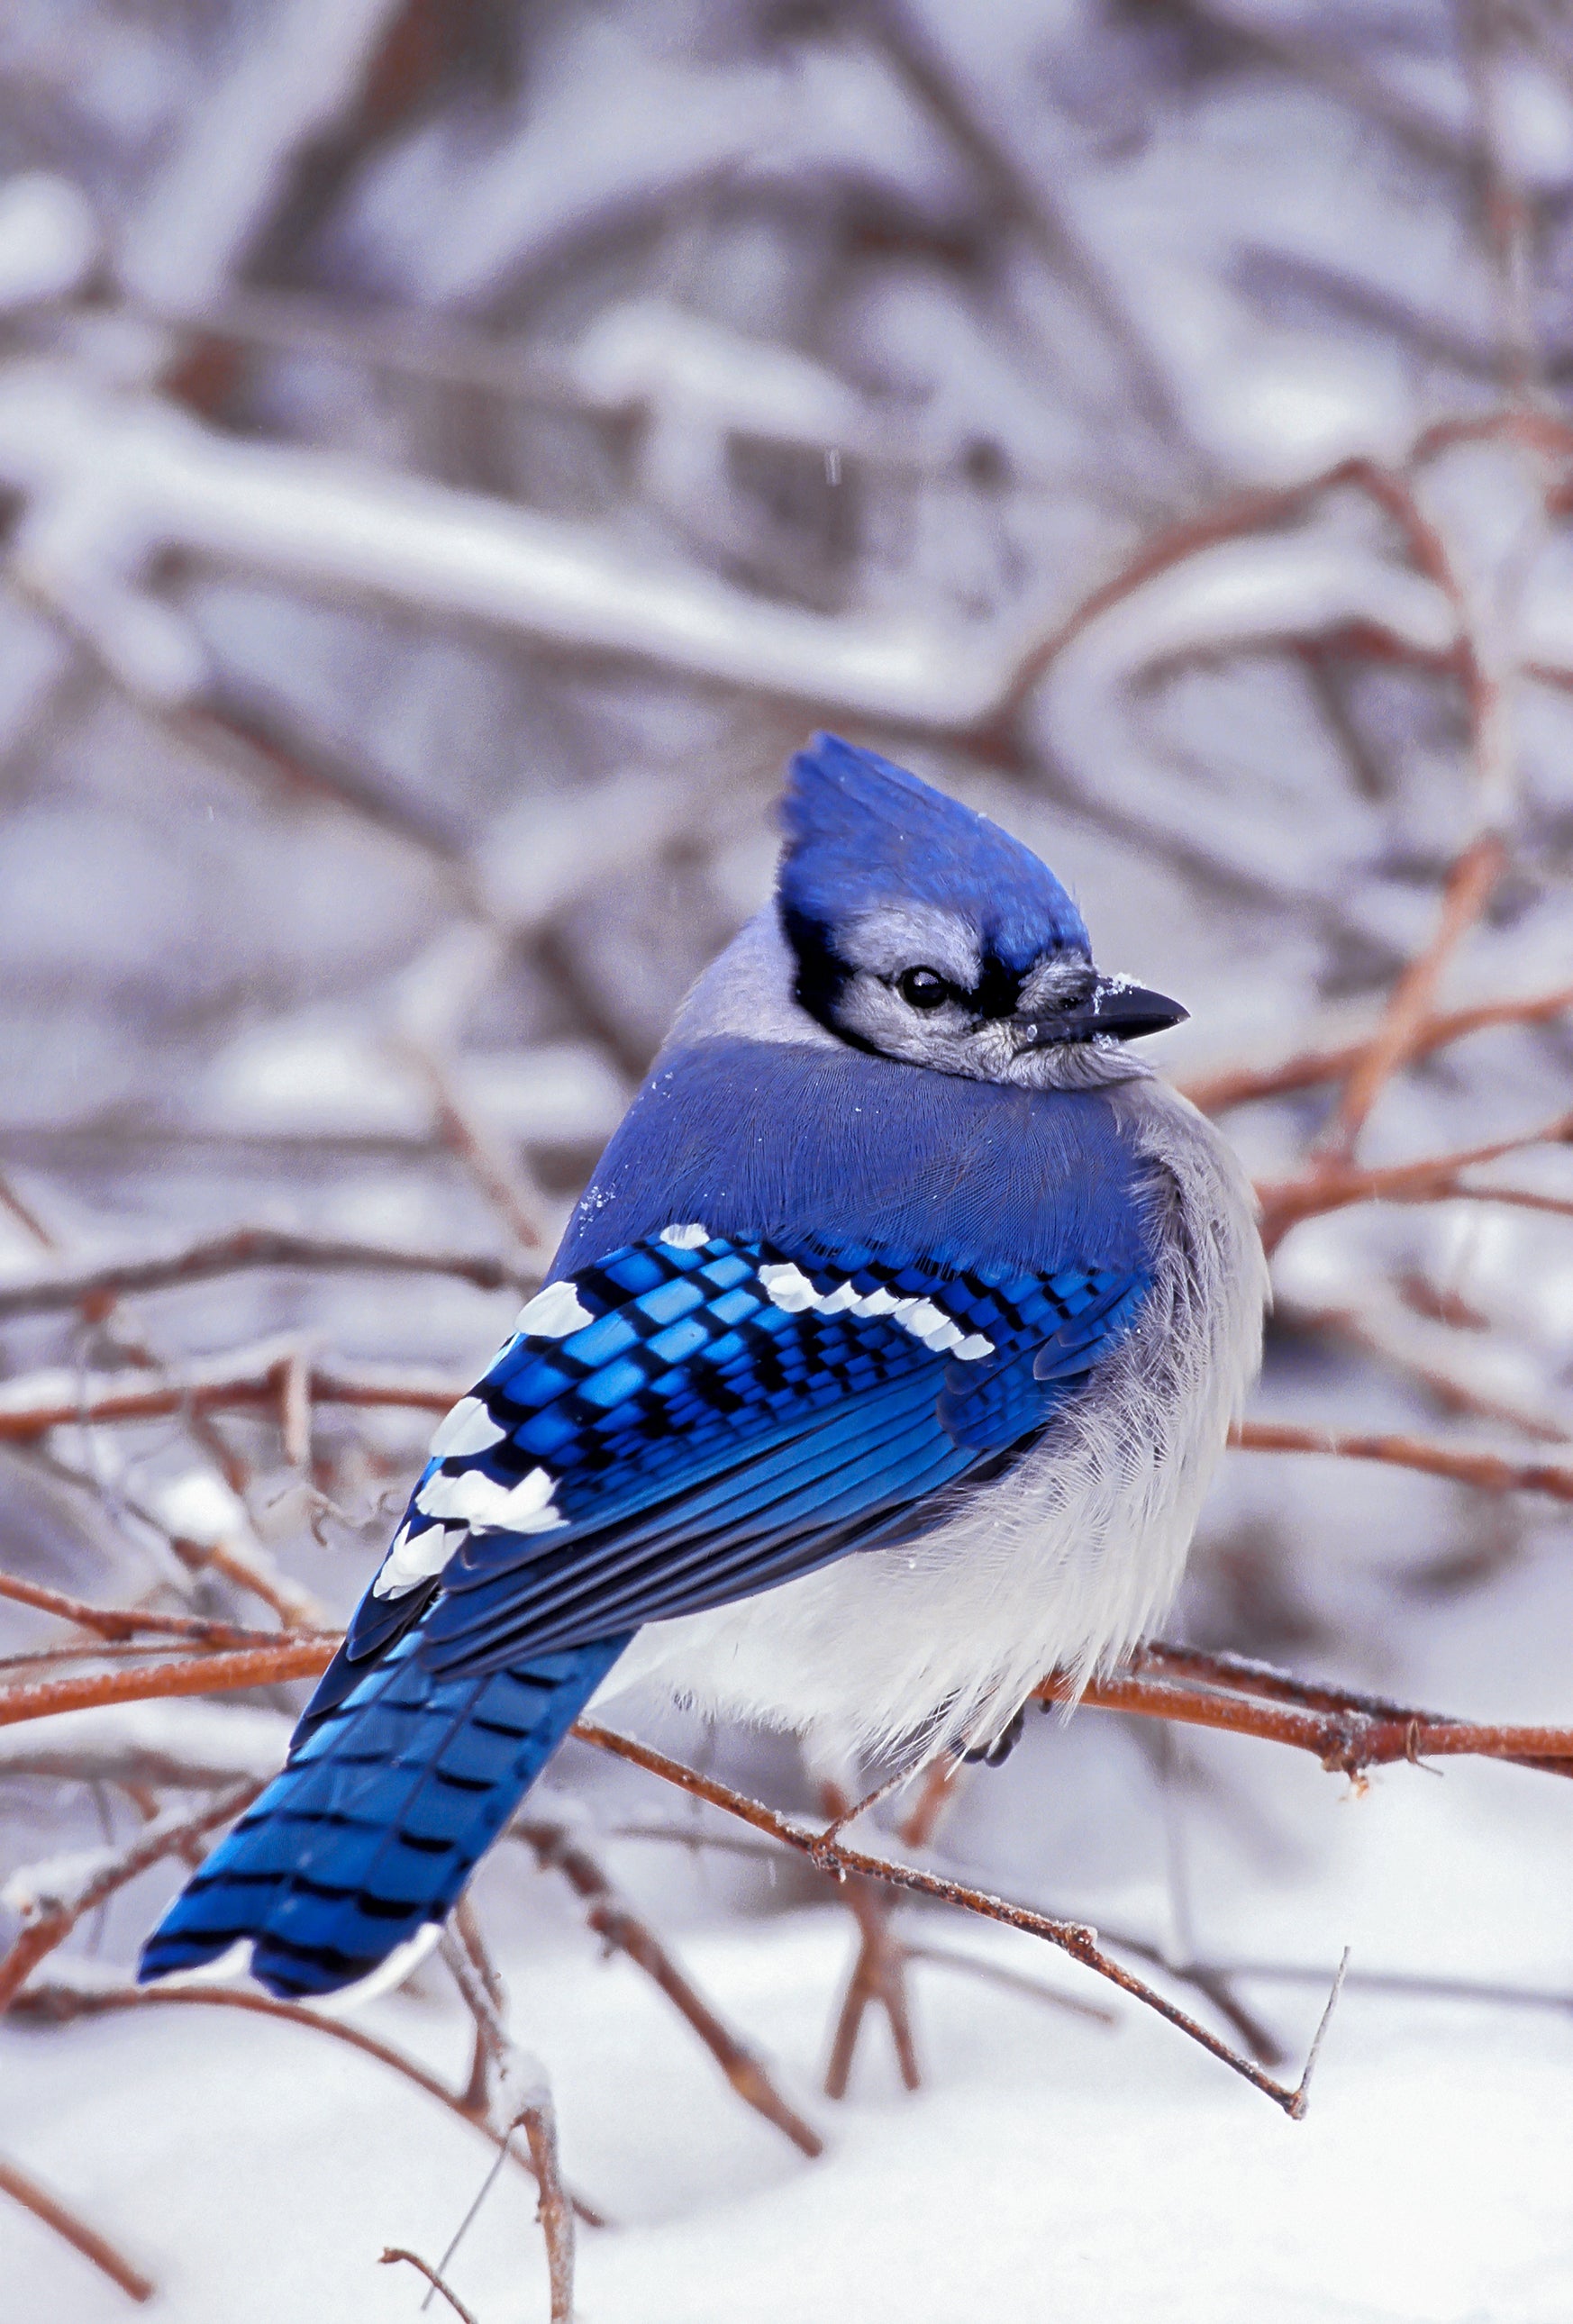 A blue jay bird sitting on branches in the snow. End of image description.